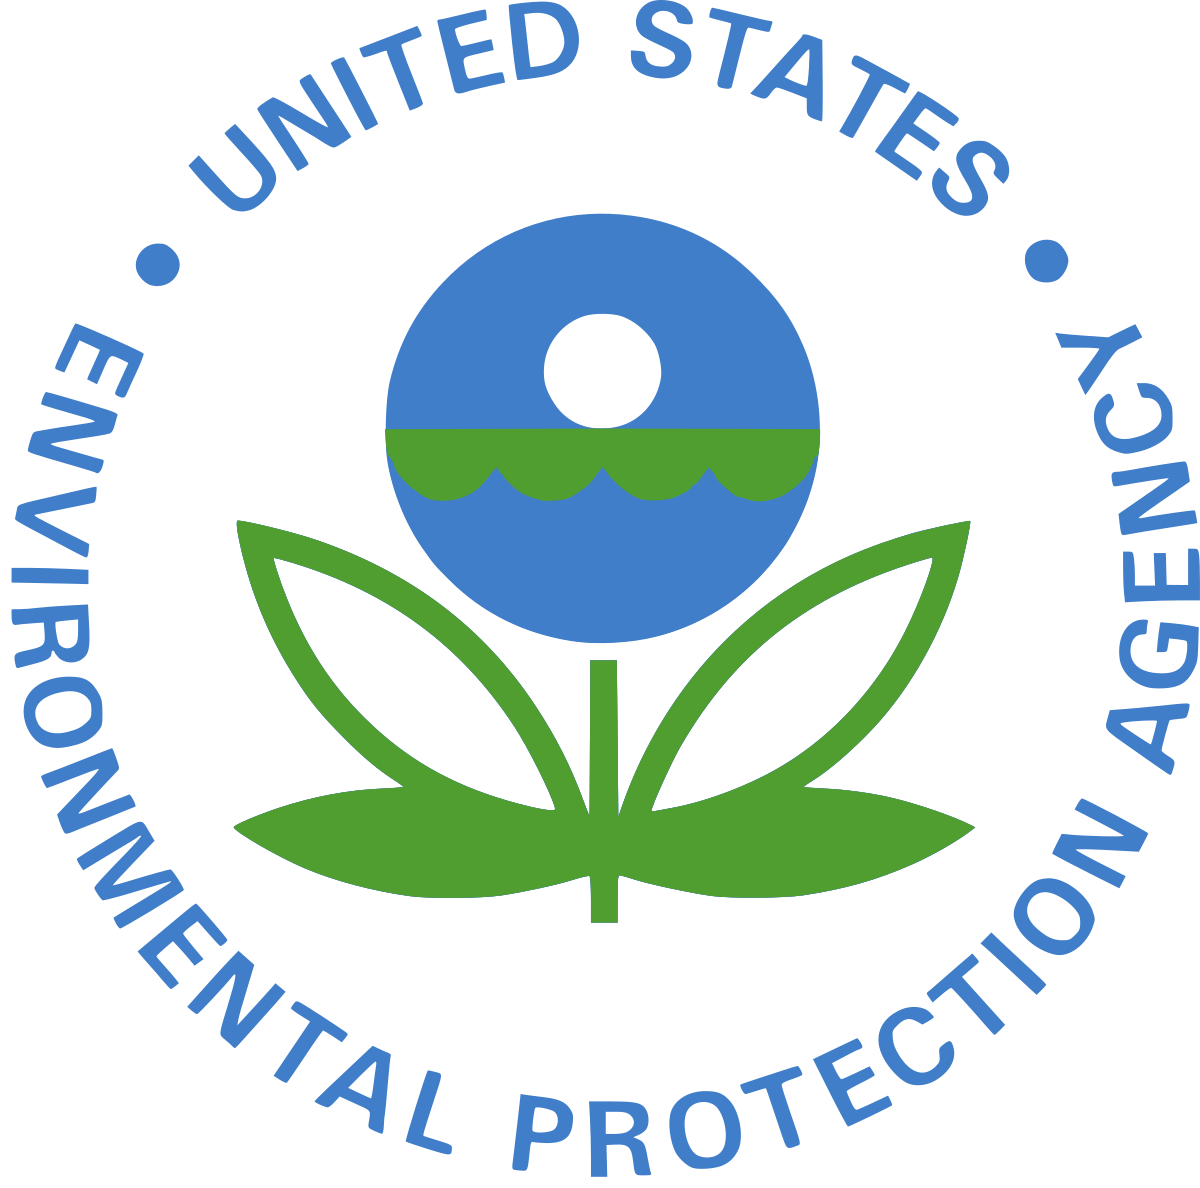 USEPA Declines to Regulate Perchlorate in Drinking Water